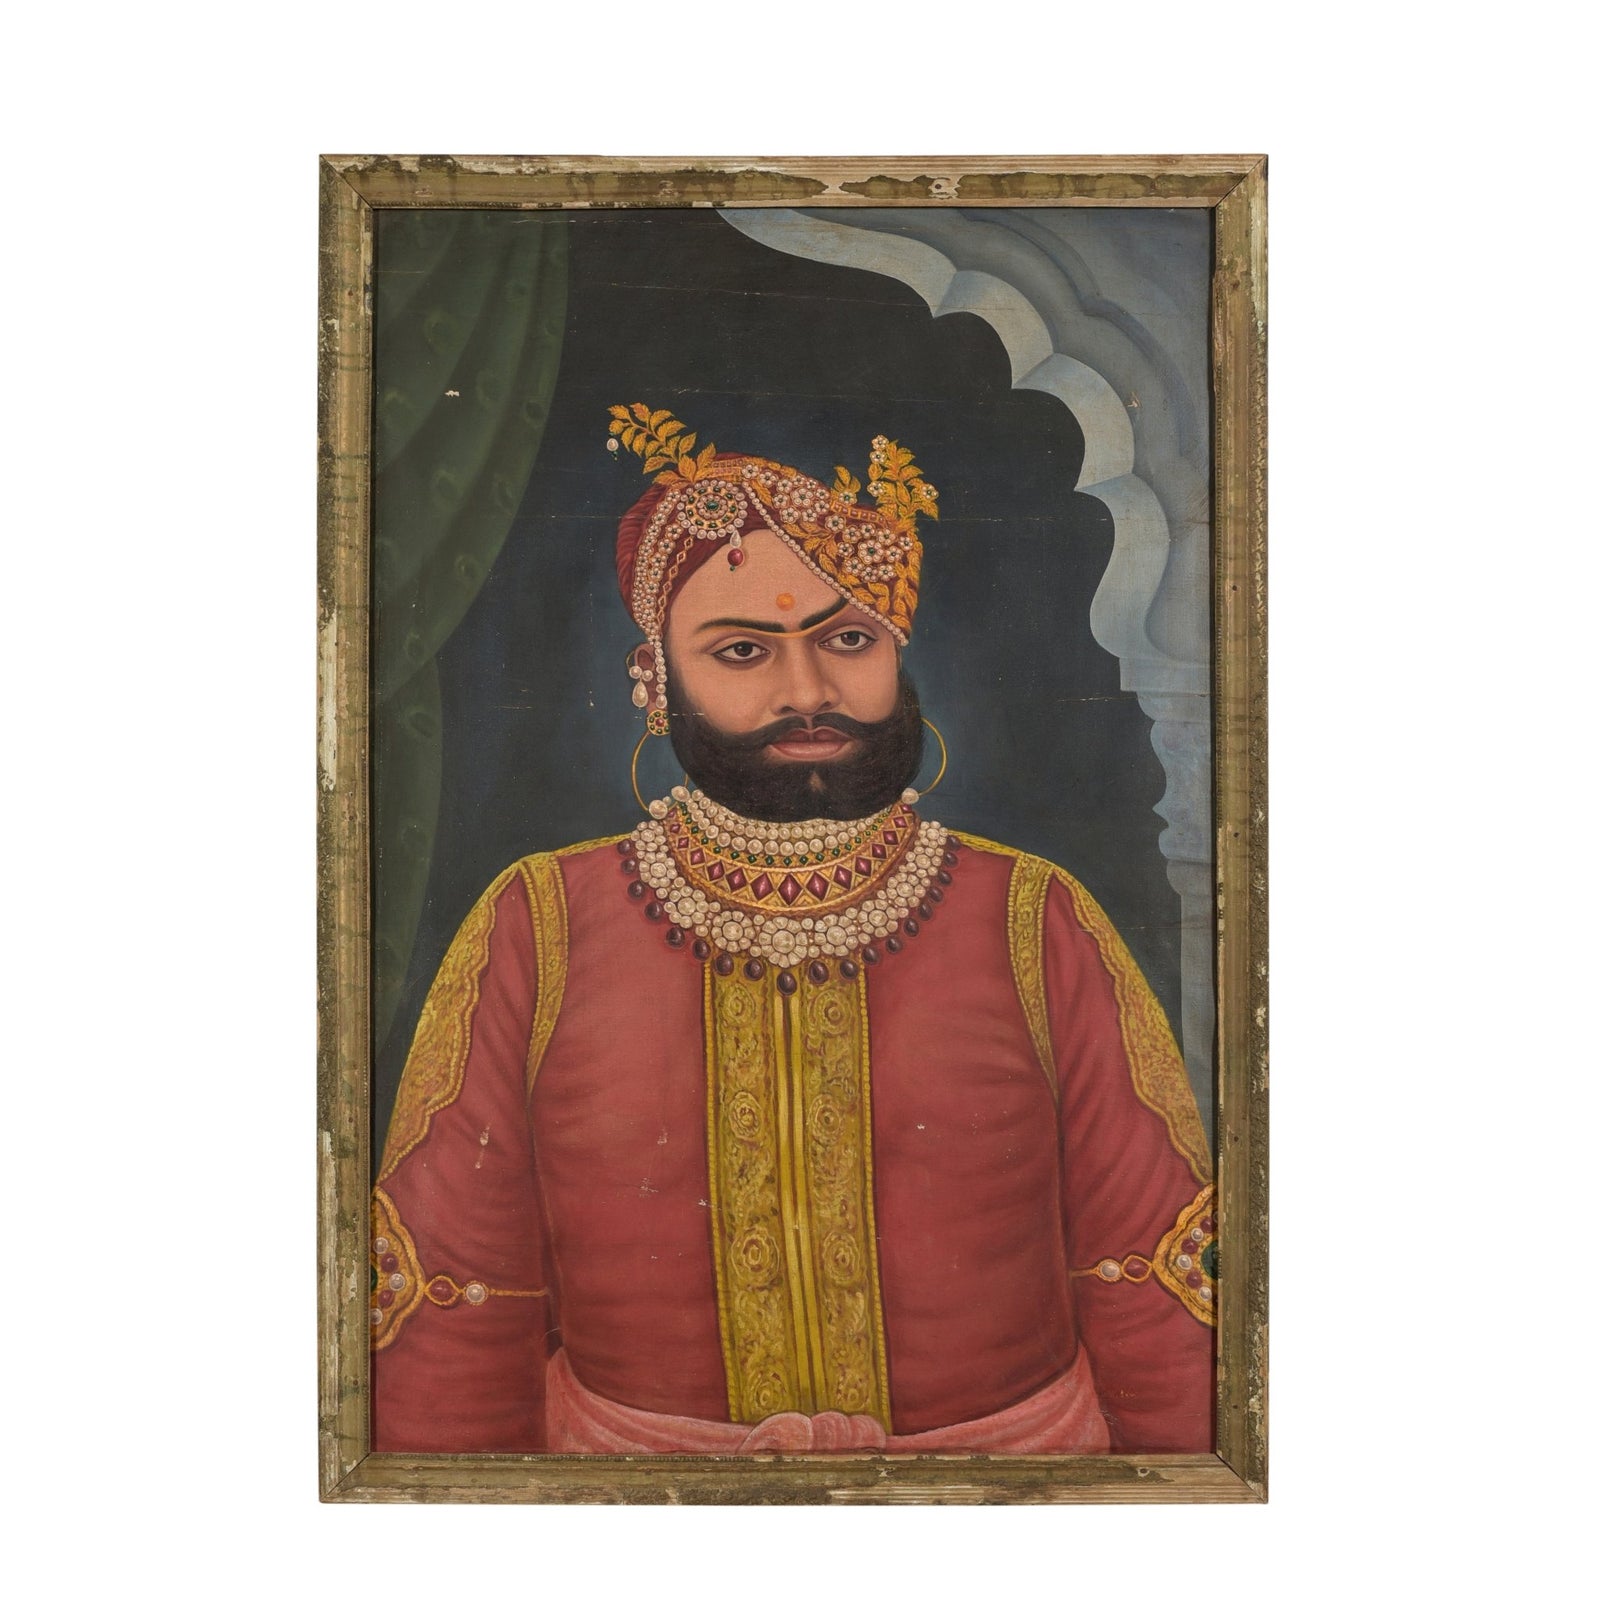  Painting Of A Marwari Prince - 19thC - 66 x 4.5 x 95 (wxdxh cms) - A6037